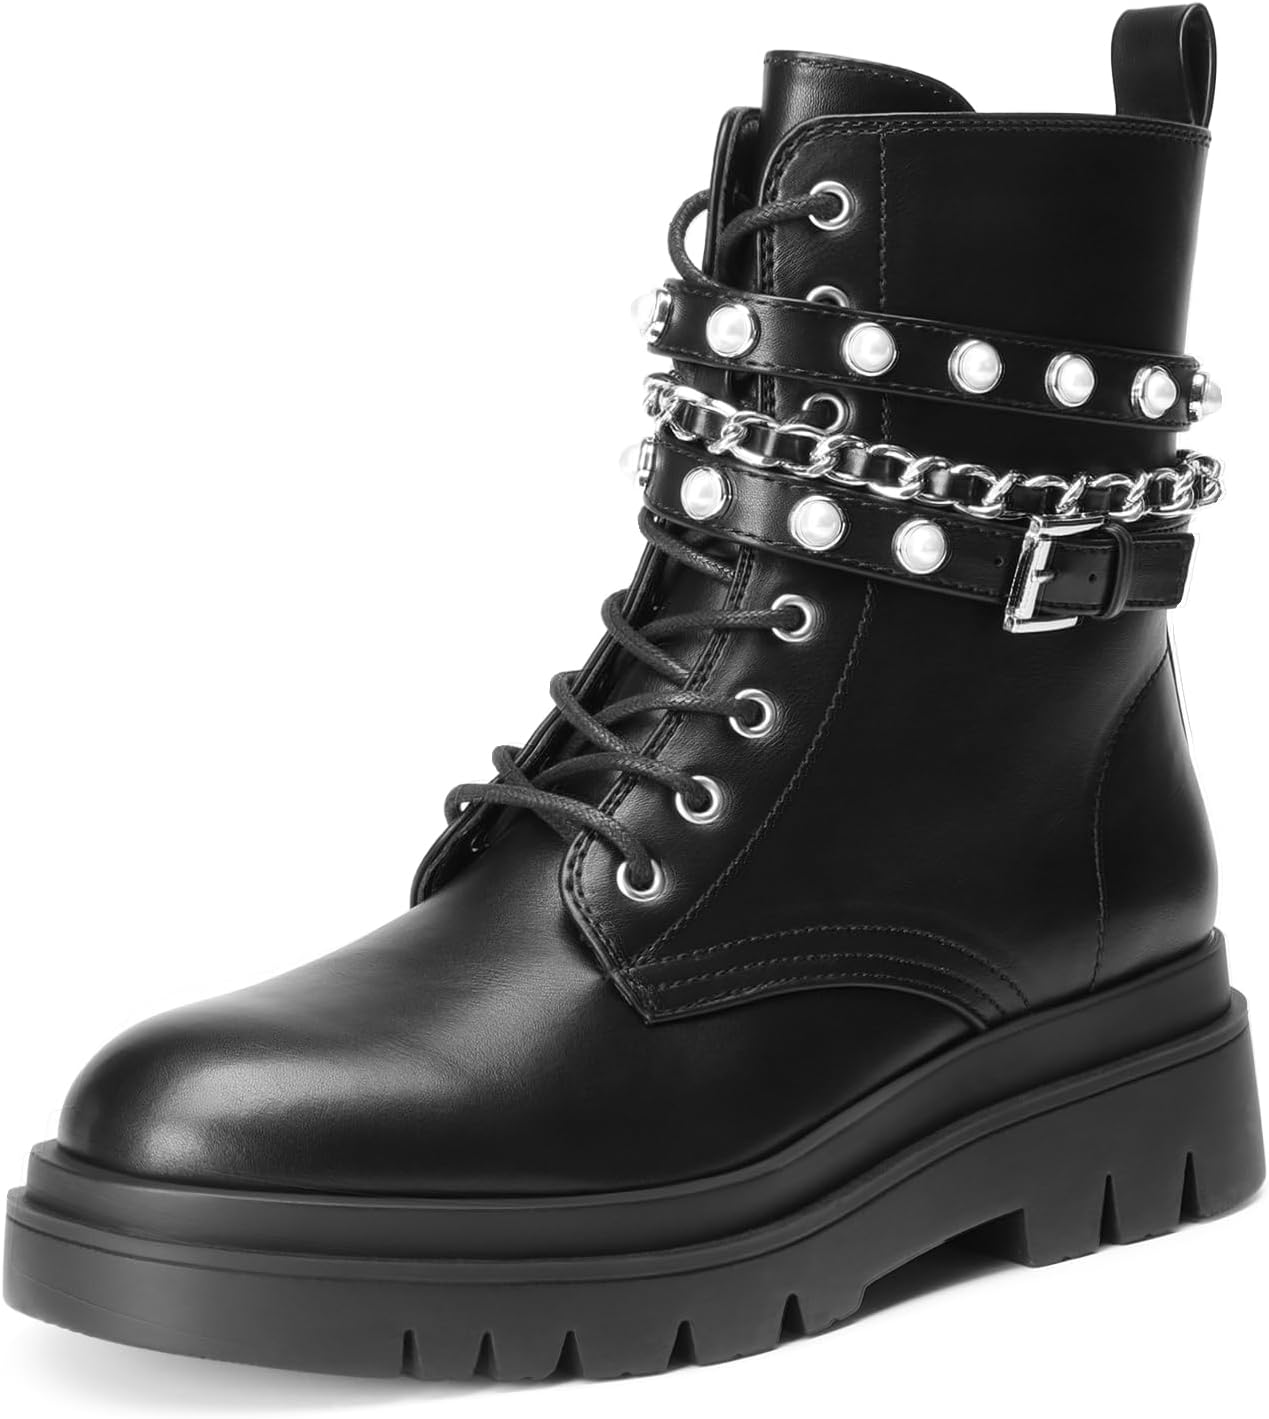 DREAM PAIRS Womens Fashion Platform Combat Boots Lace Up Lug Sole Goth Ankle Booties Shoes